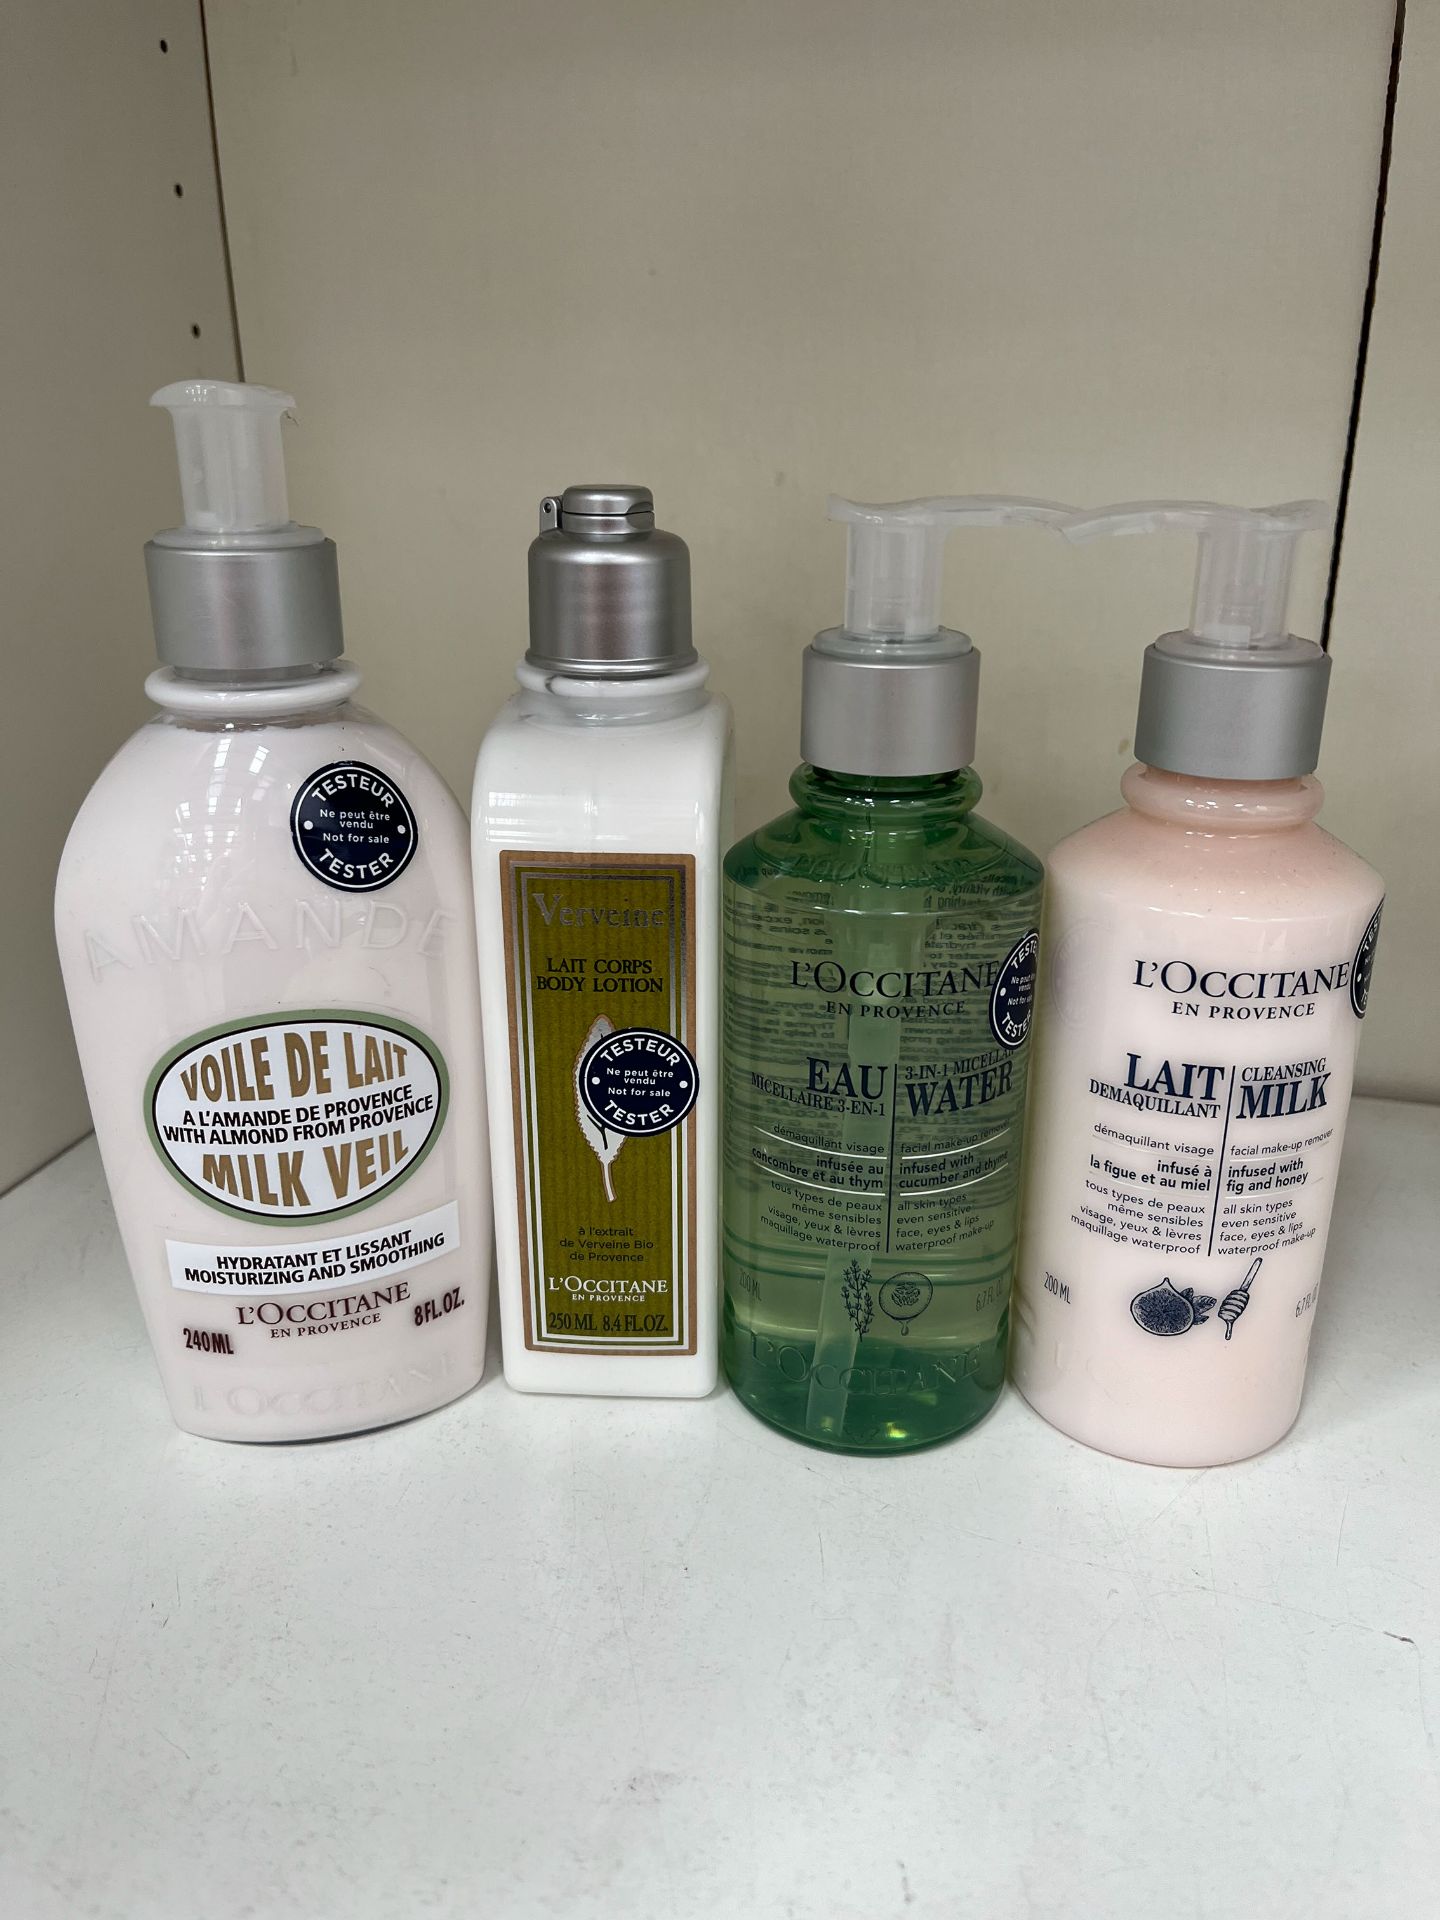 A Collection of L'Occitane Tester Skin Products - Image 4 of 7